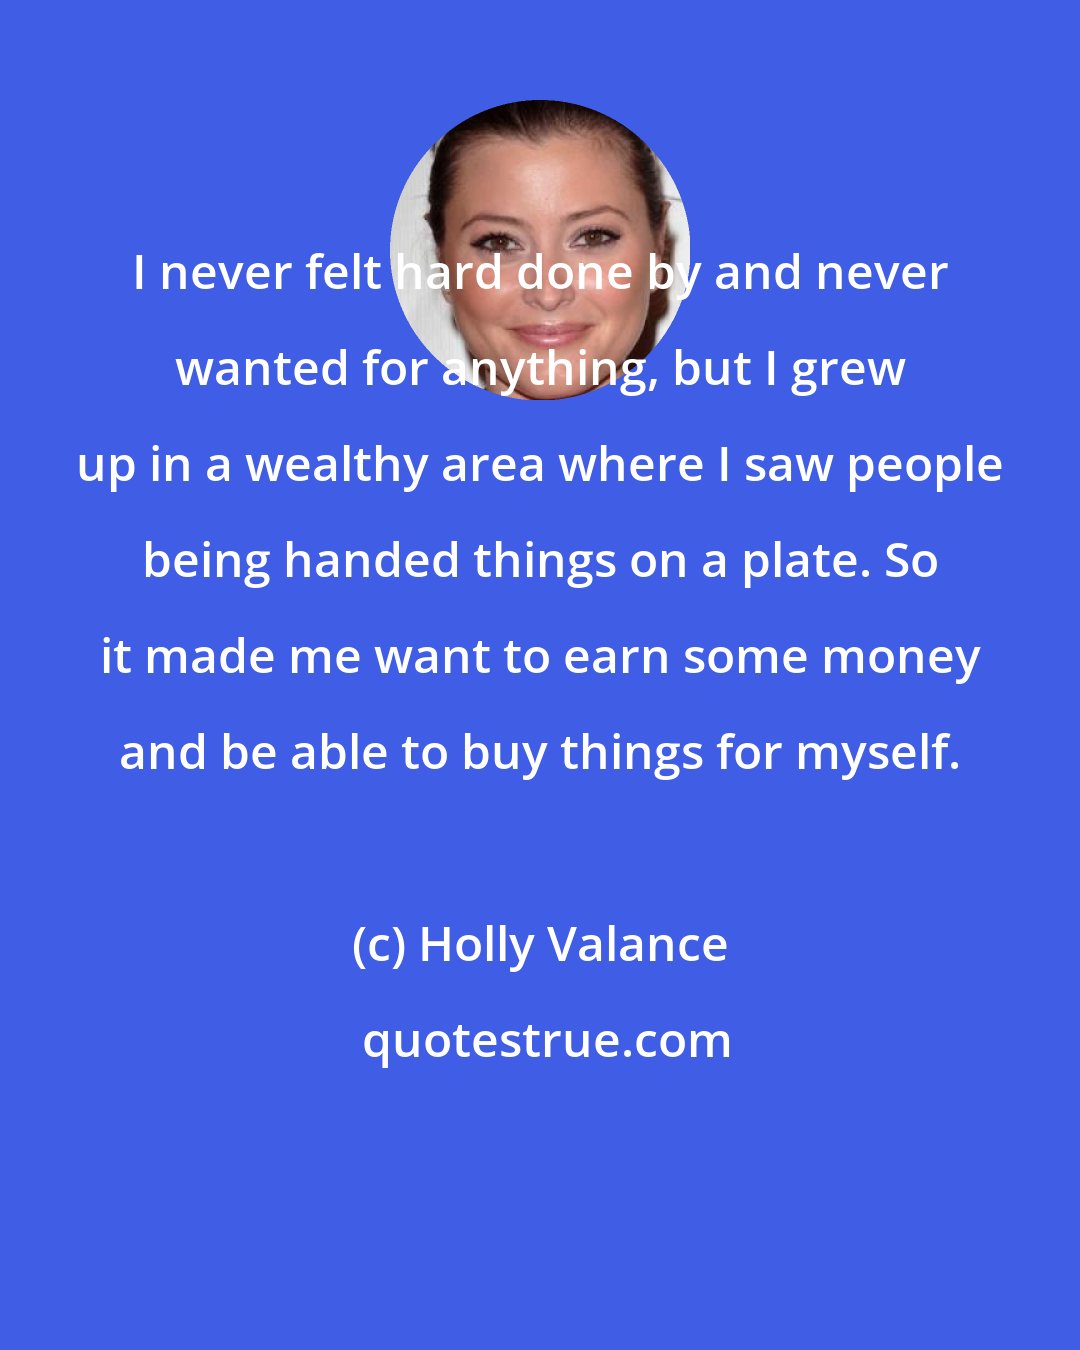 Holly Valance: I never felt hard done by and never wanted for anything, but I grew up in a wealthy area where I saw people being handed things on a plate. So it made me want to earn some money and be able to buy things for myself.